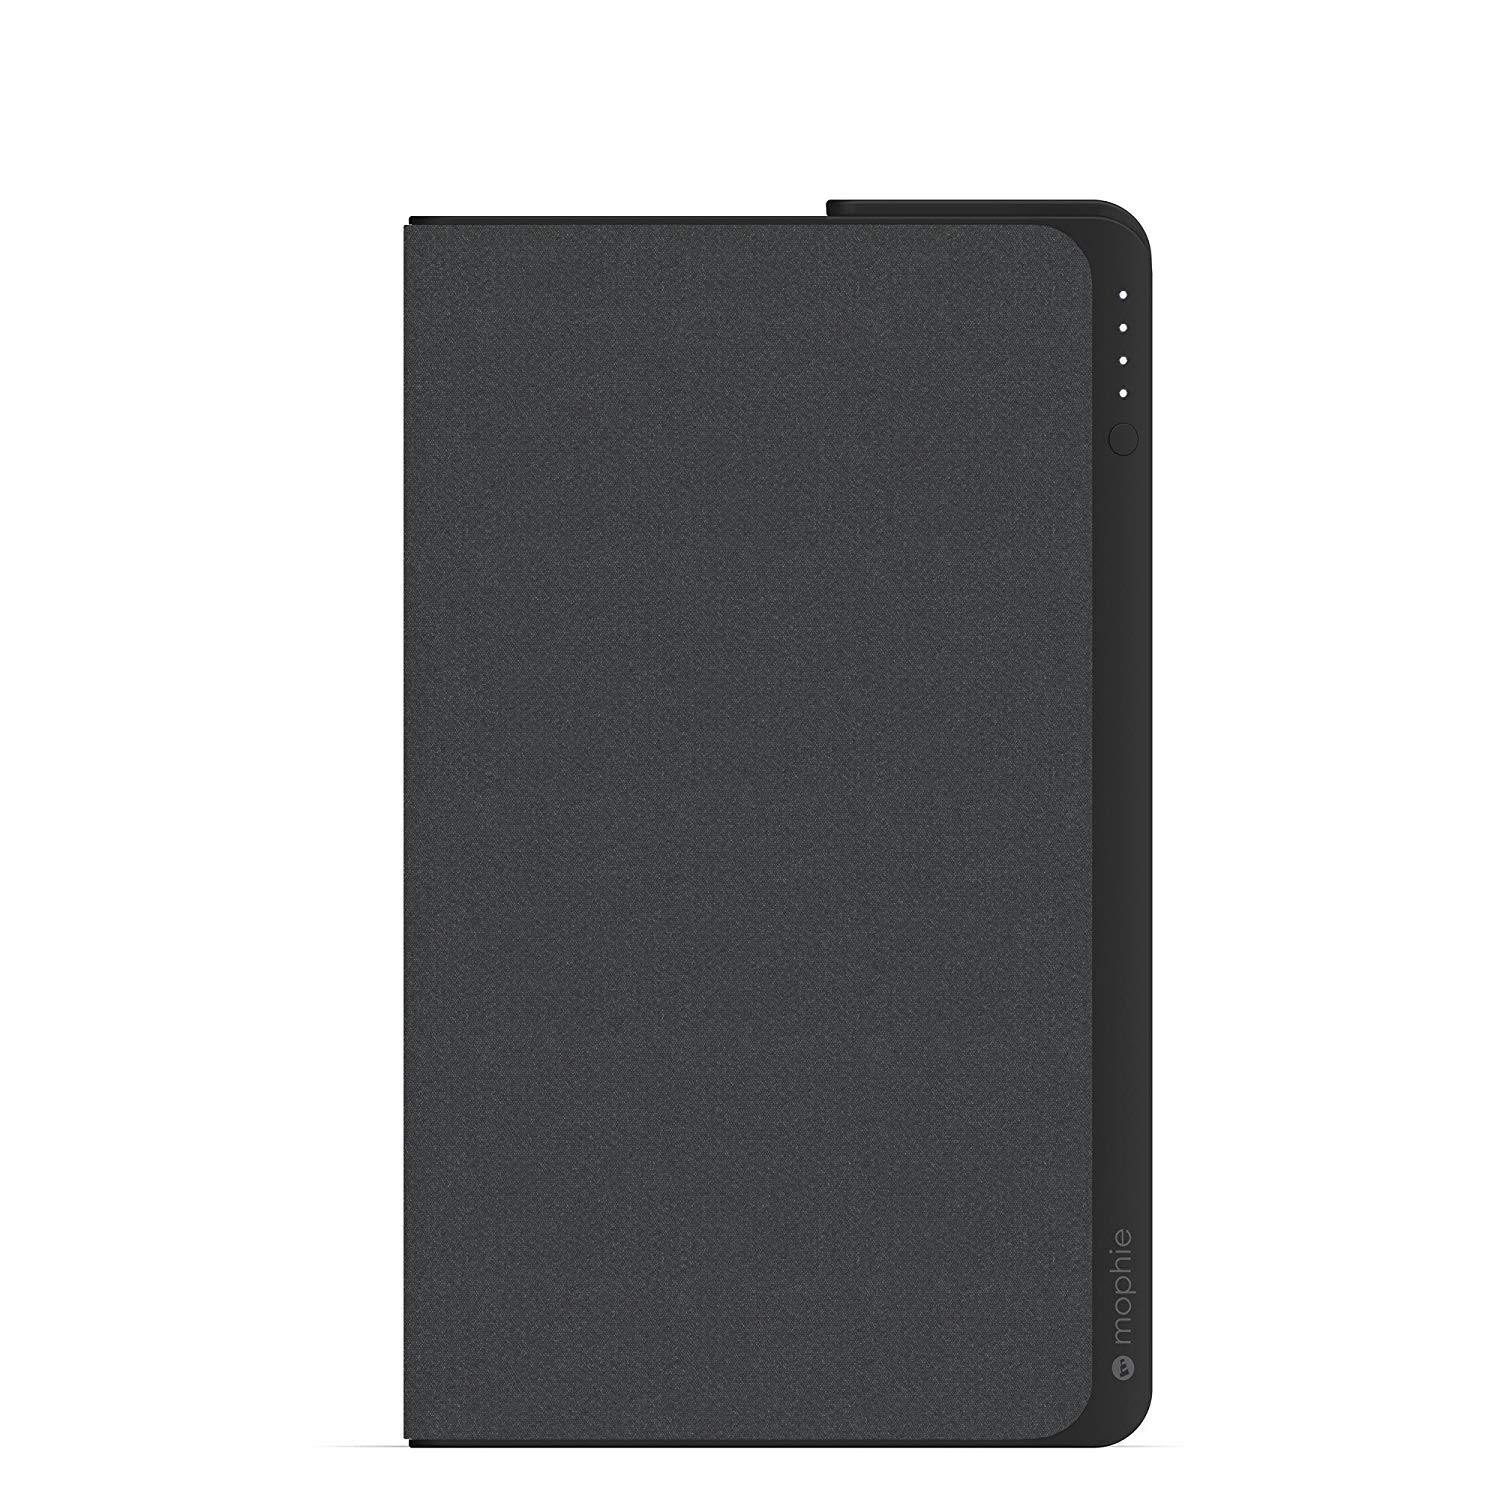 Mophie Powerstation AC product image